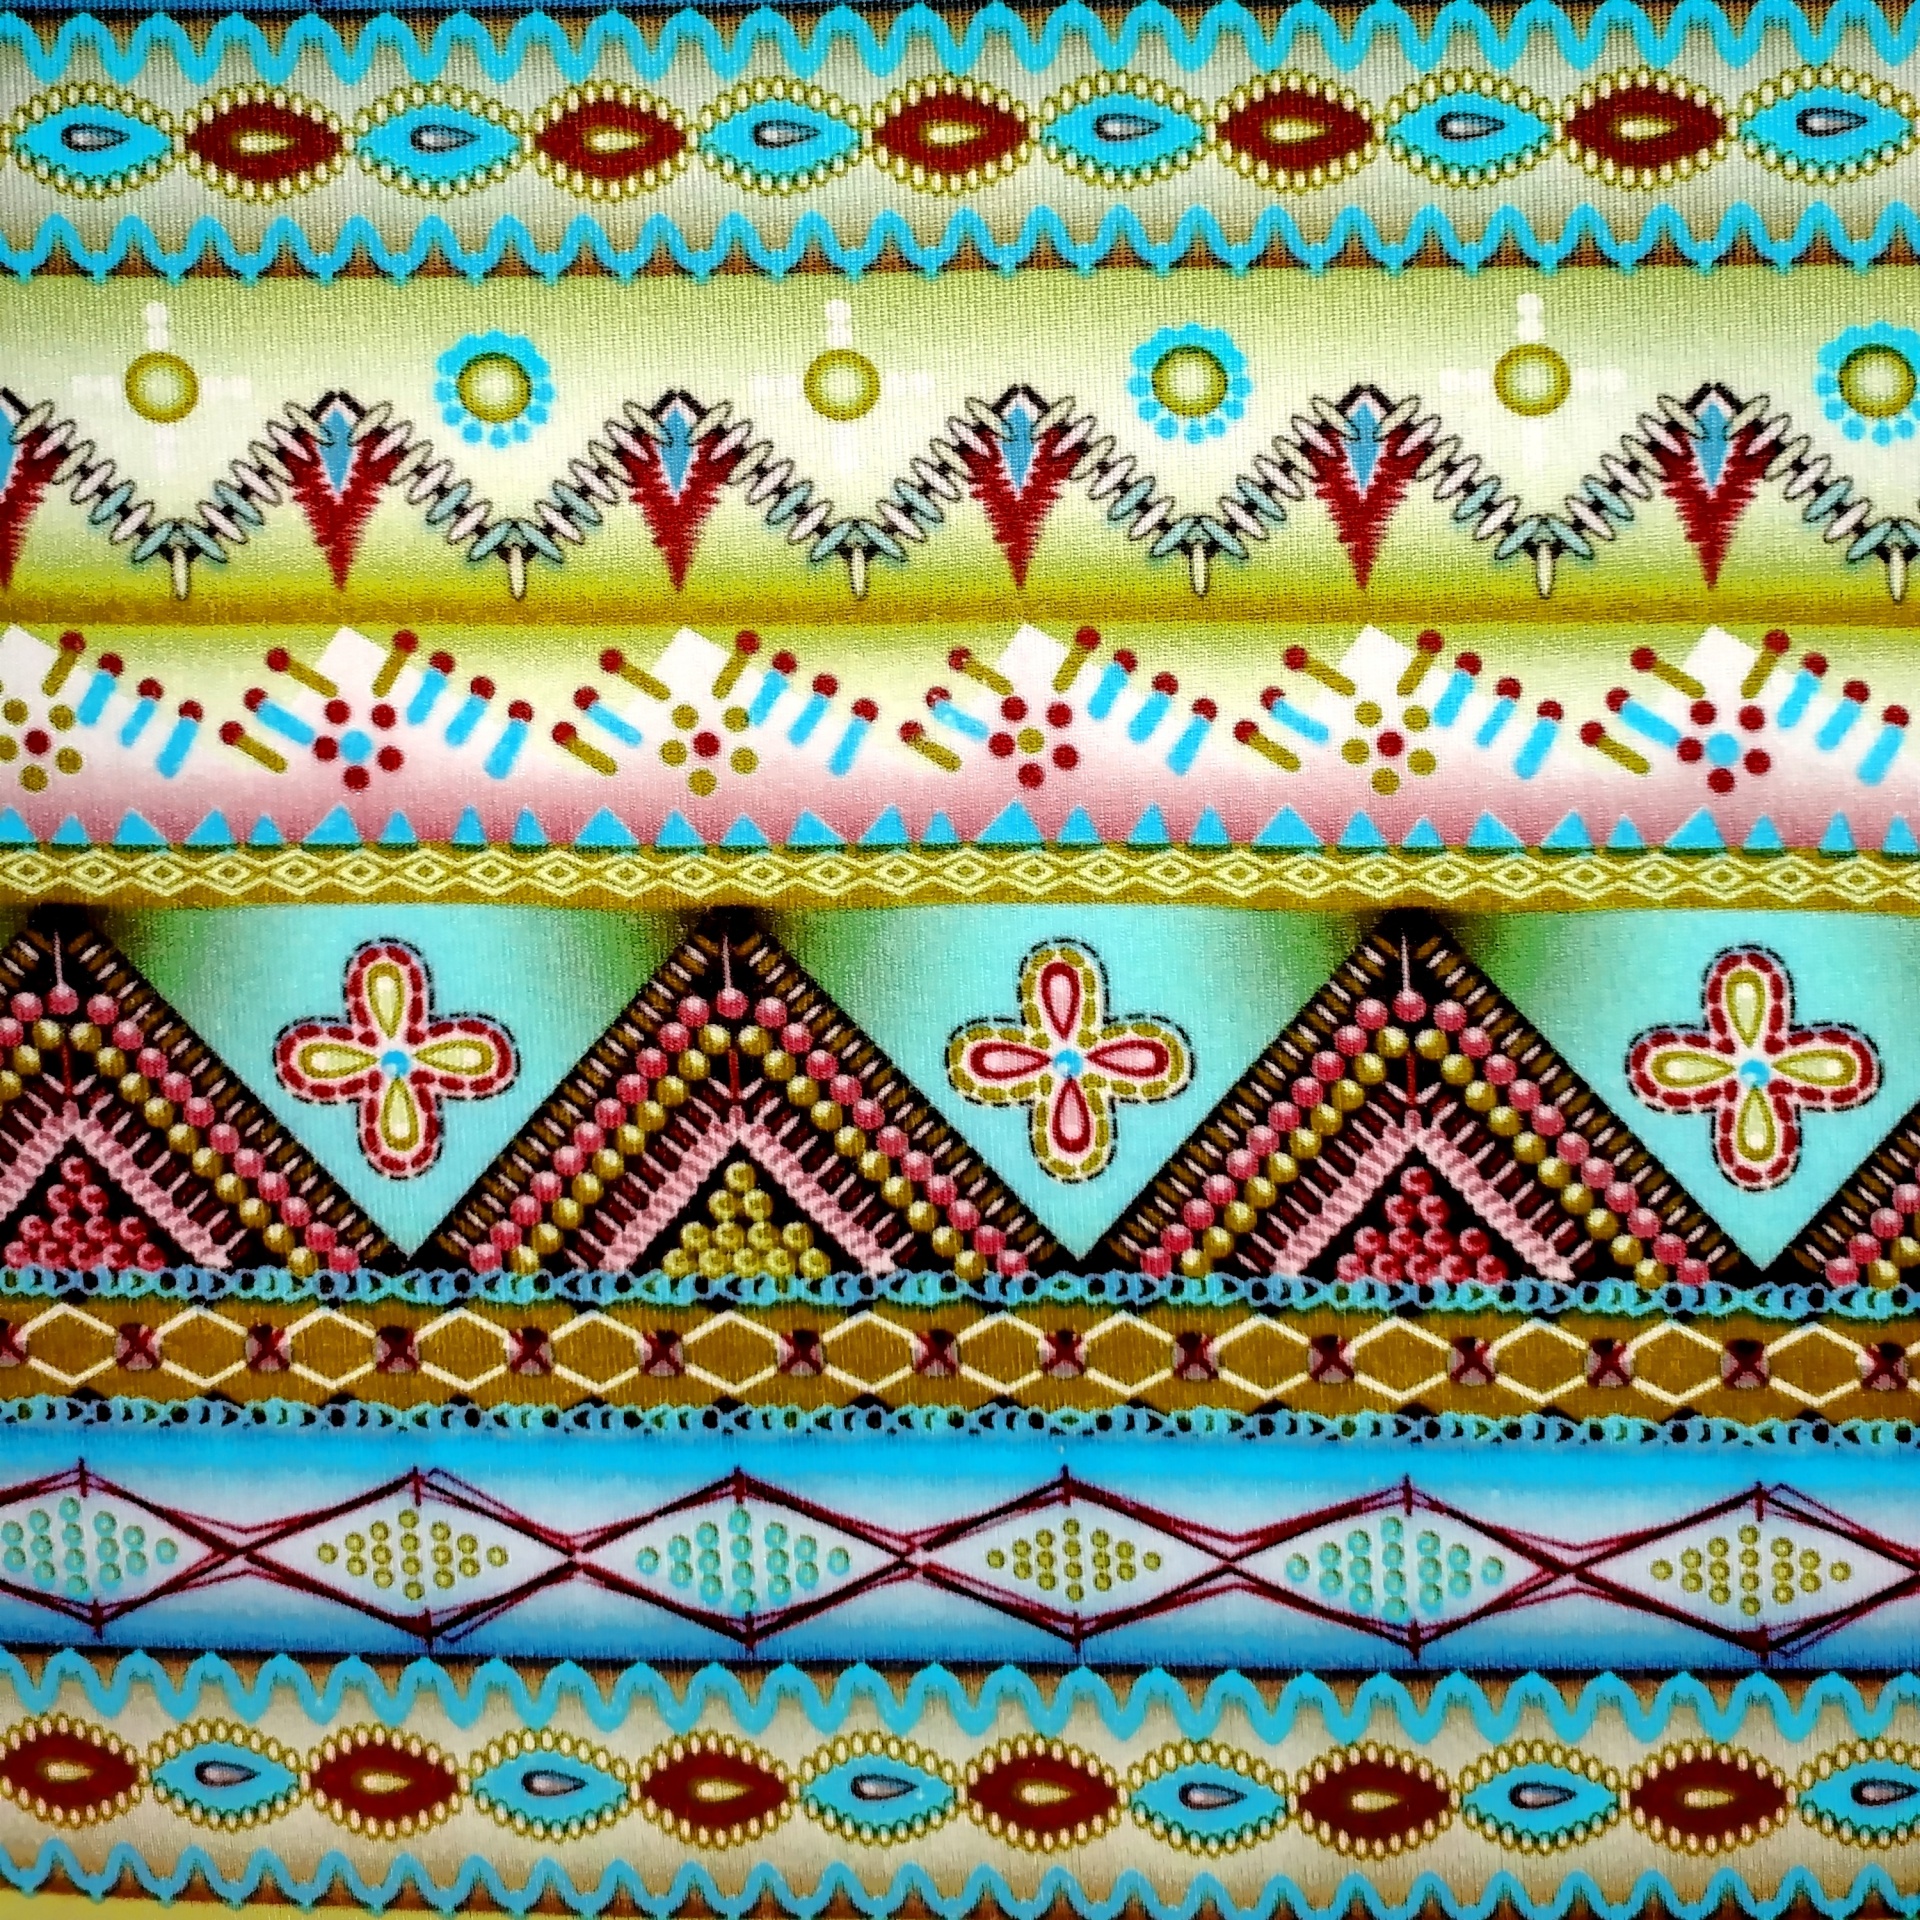 Picture of colorful patterned fabric for scrapbooking or other